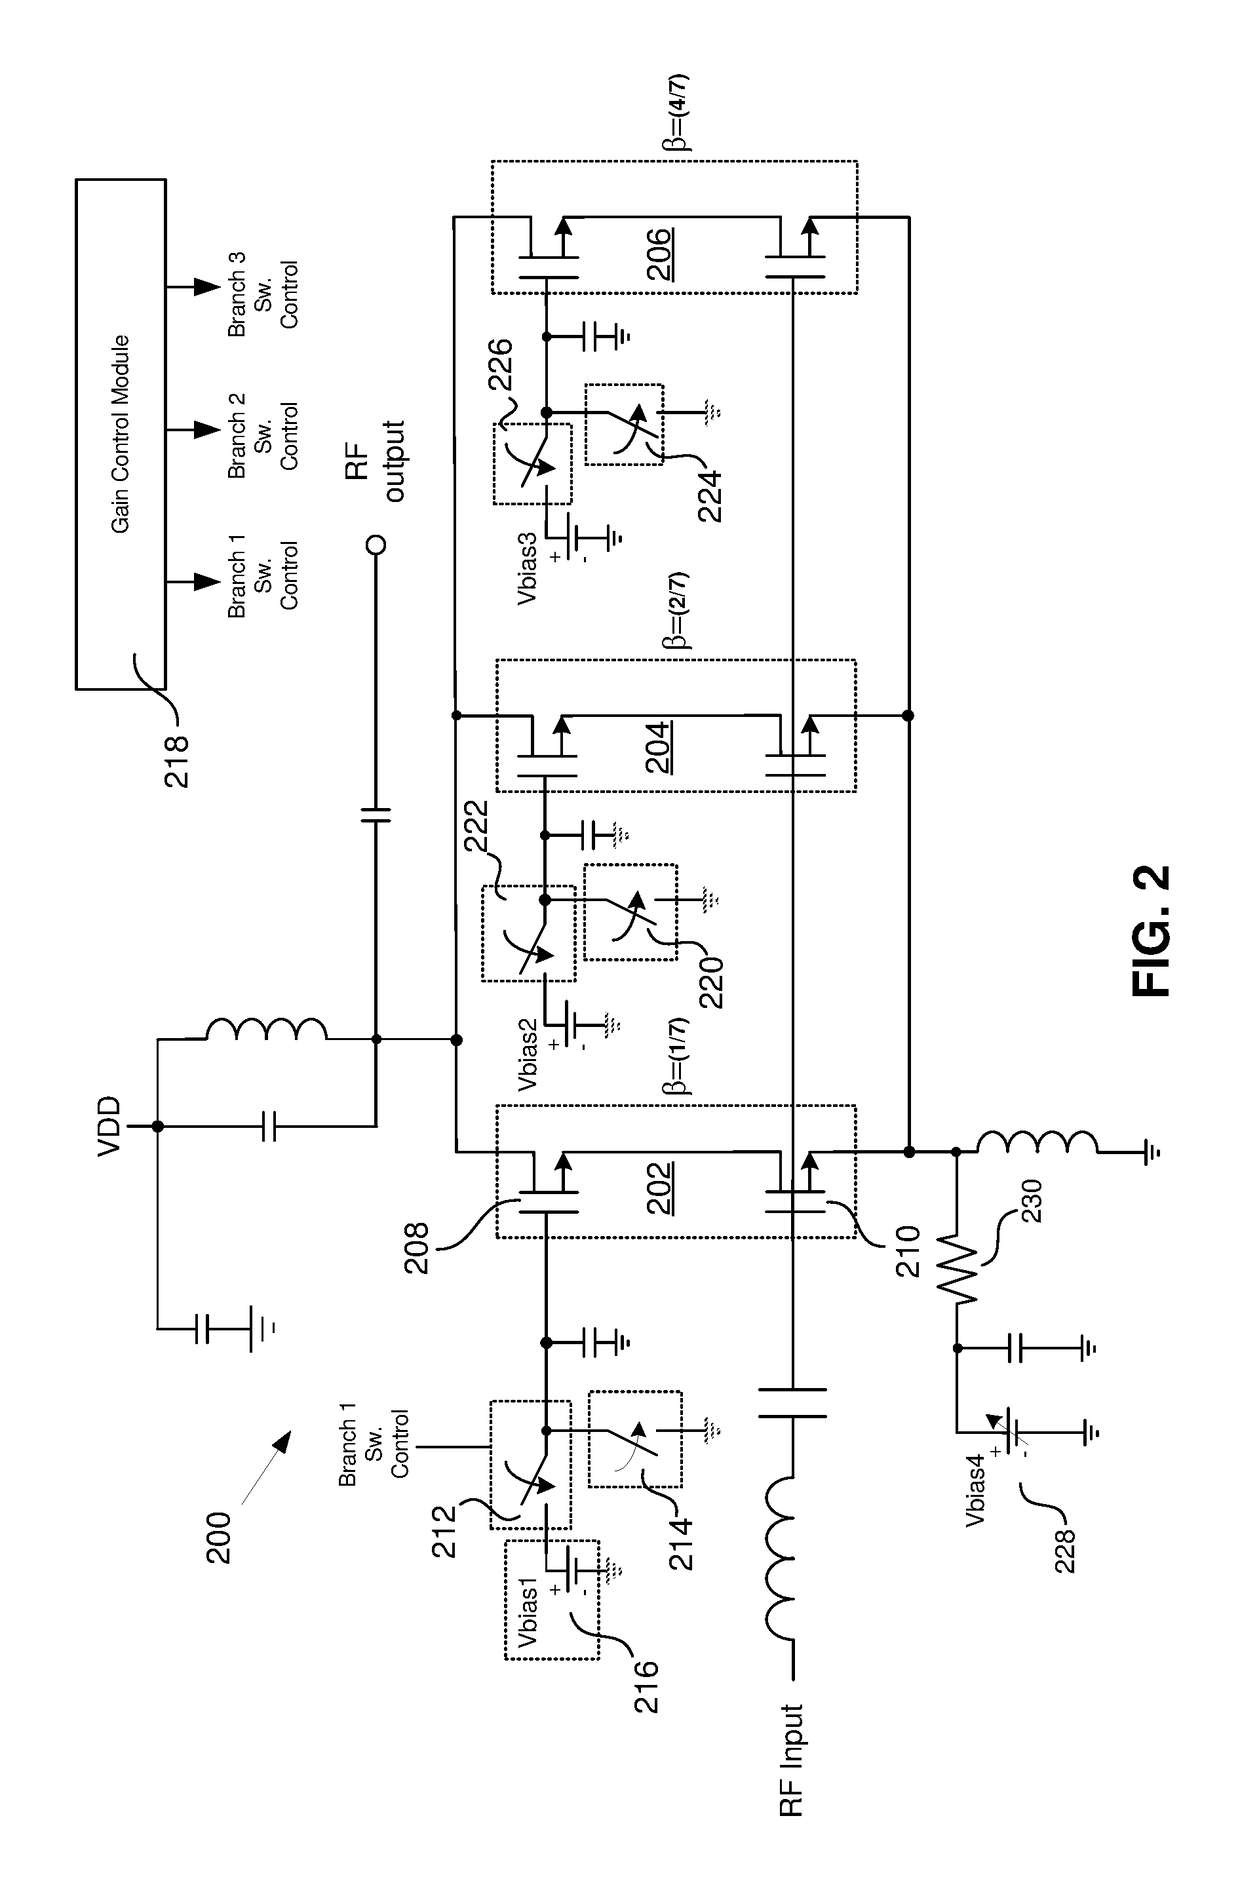 LNA with programmable linearity